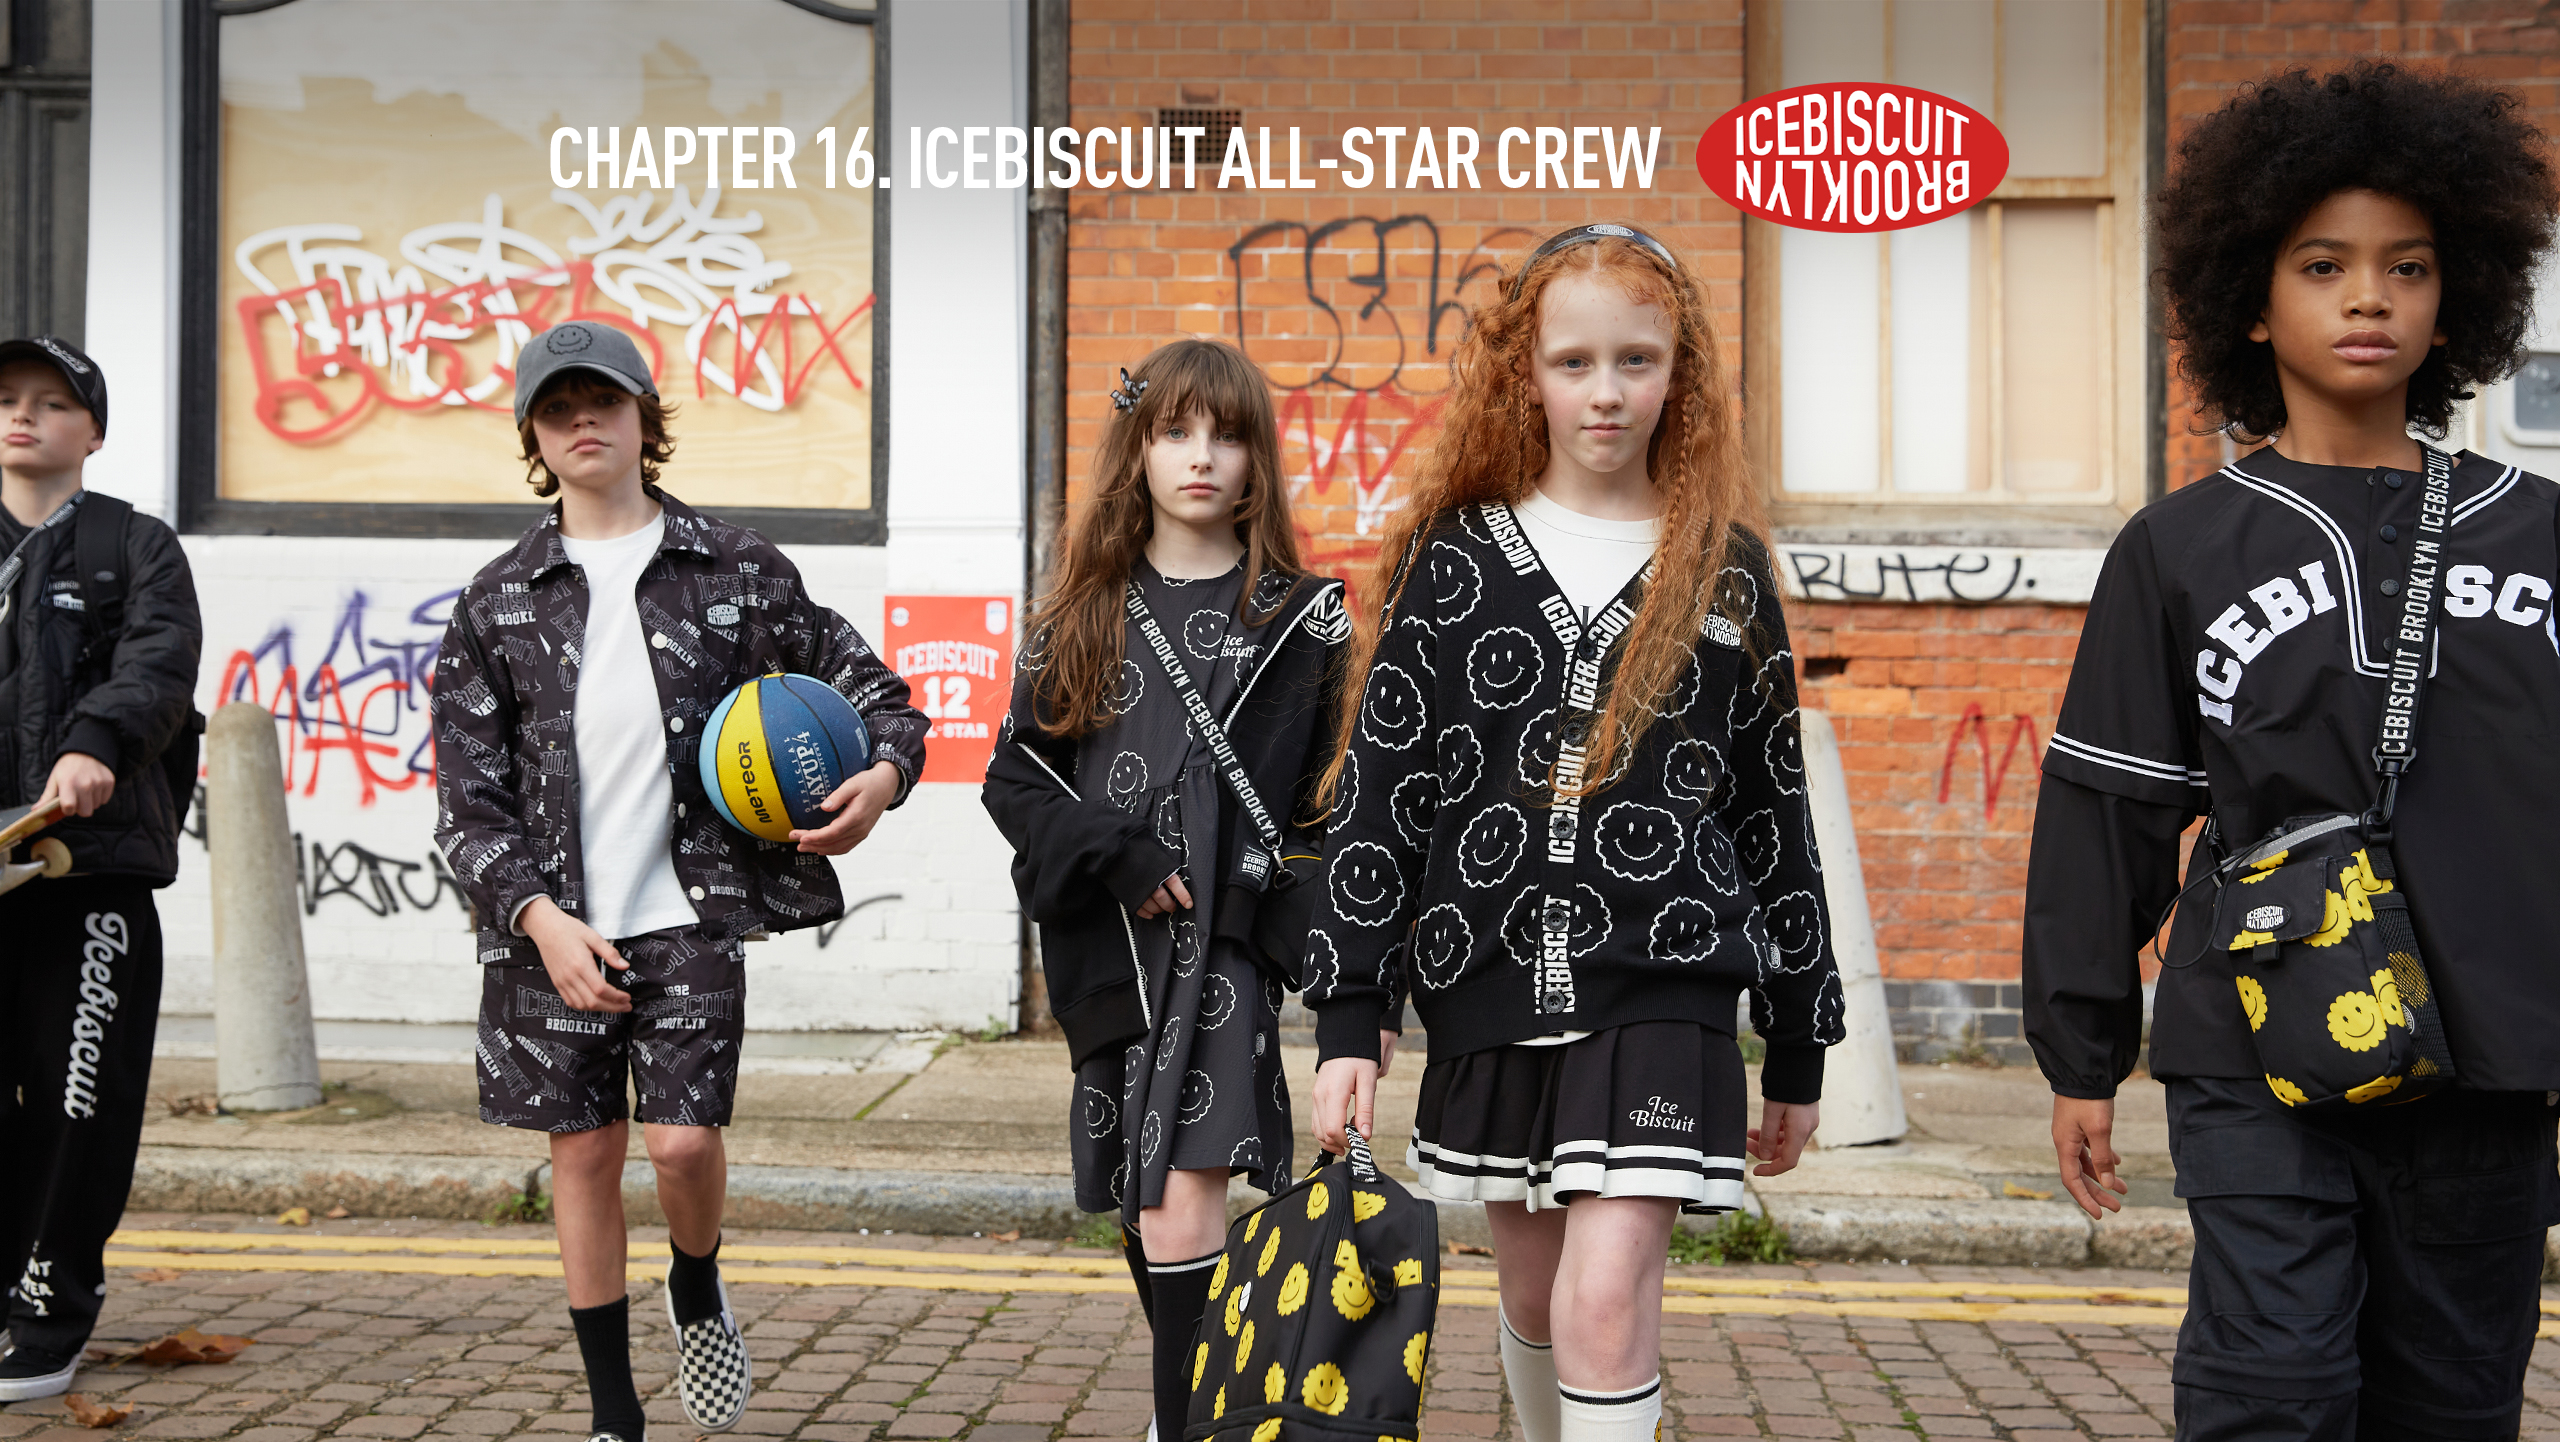 CHAPTER 16. ICEBISCUIT ALL-STAR CREW